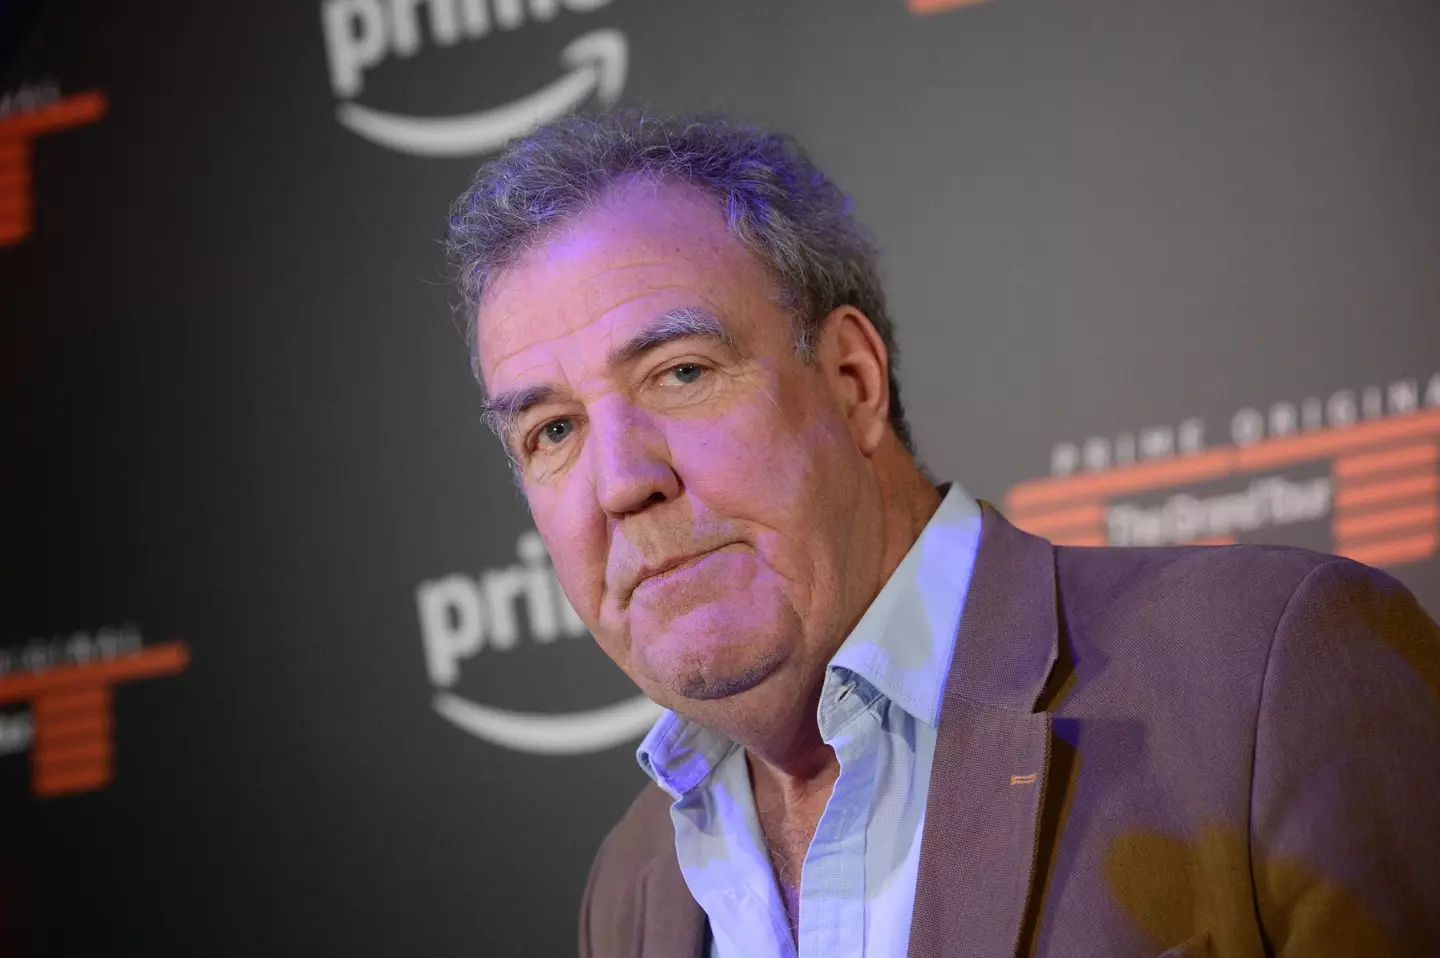 Clarkson issued a lengthy apology following the backlash.